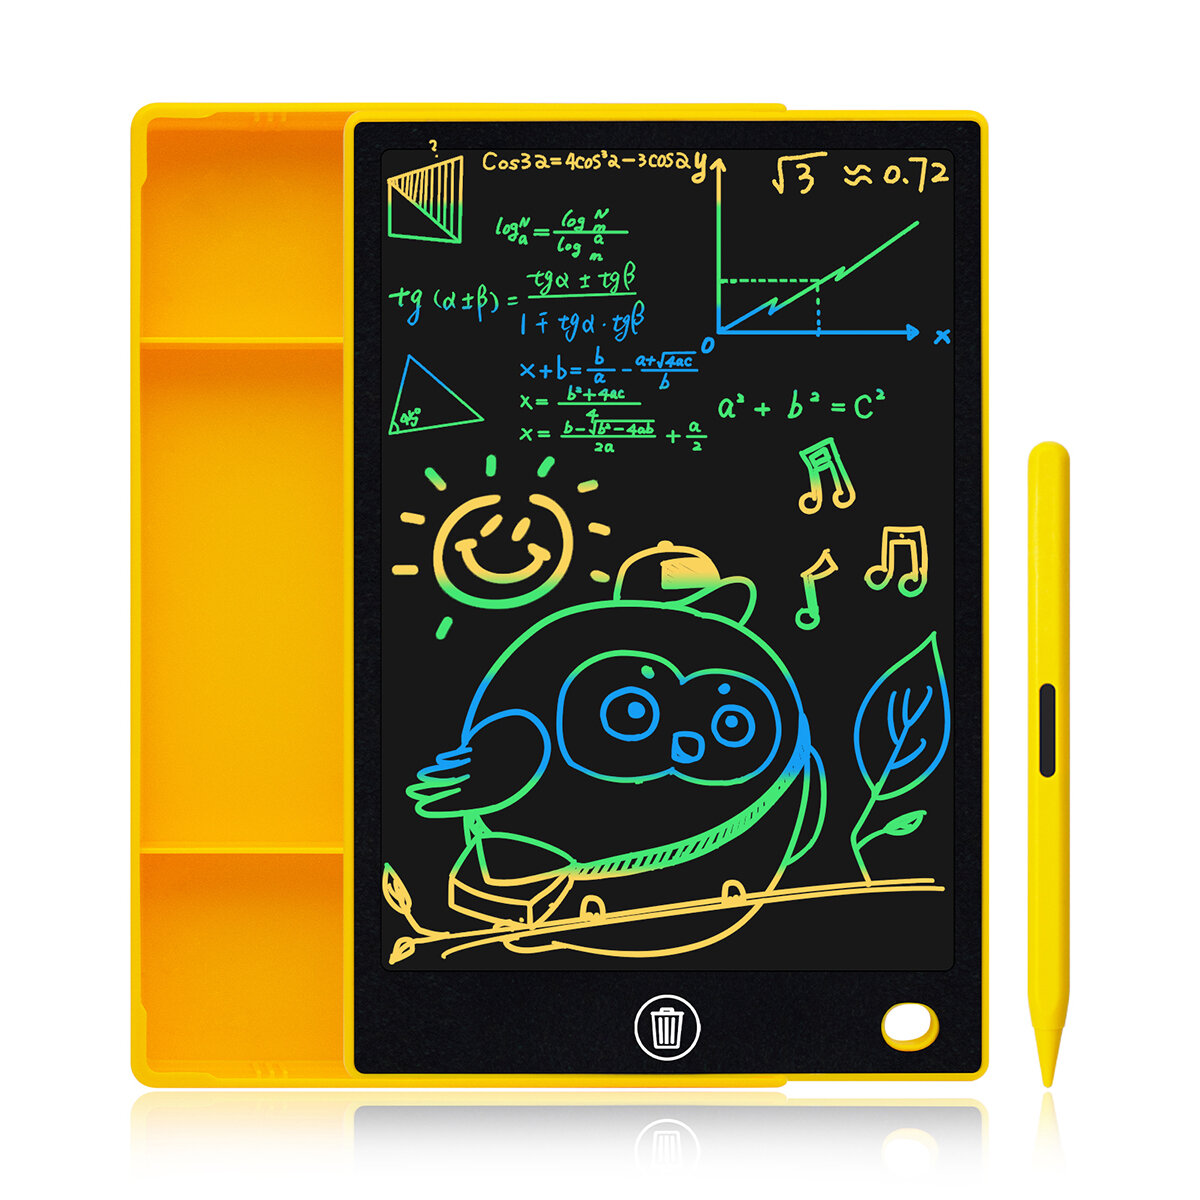 NUSITE 085C 8.5 Inch LCD Writing Tablet Colorful Multi-function 2 in 1 Pencil Box Drawing Doodle Board for Kids Students